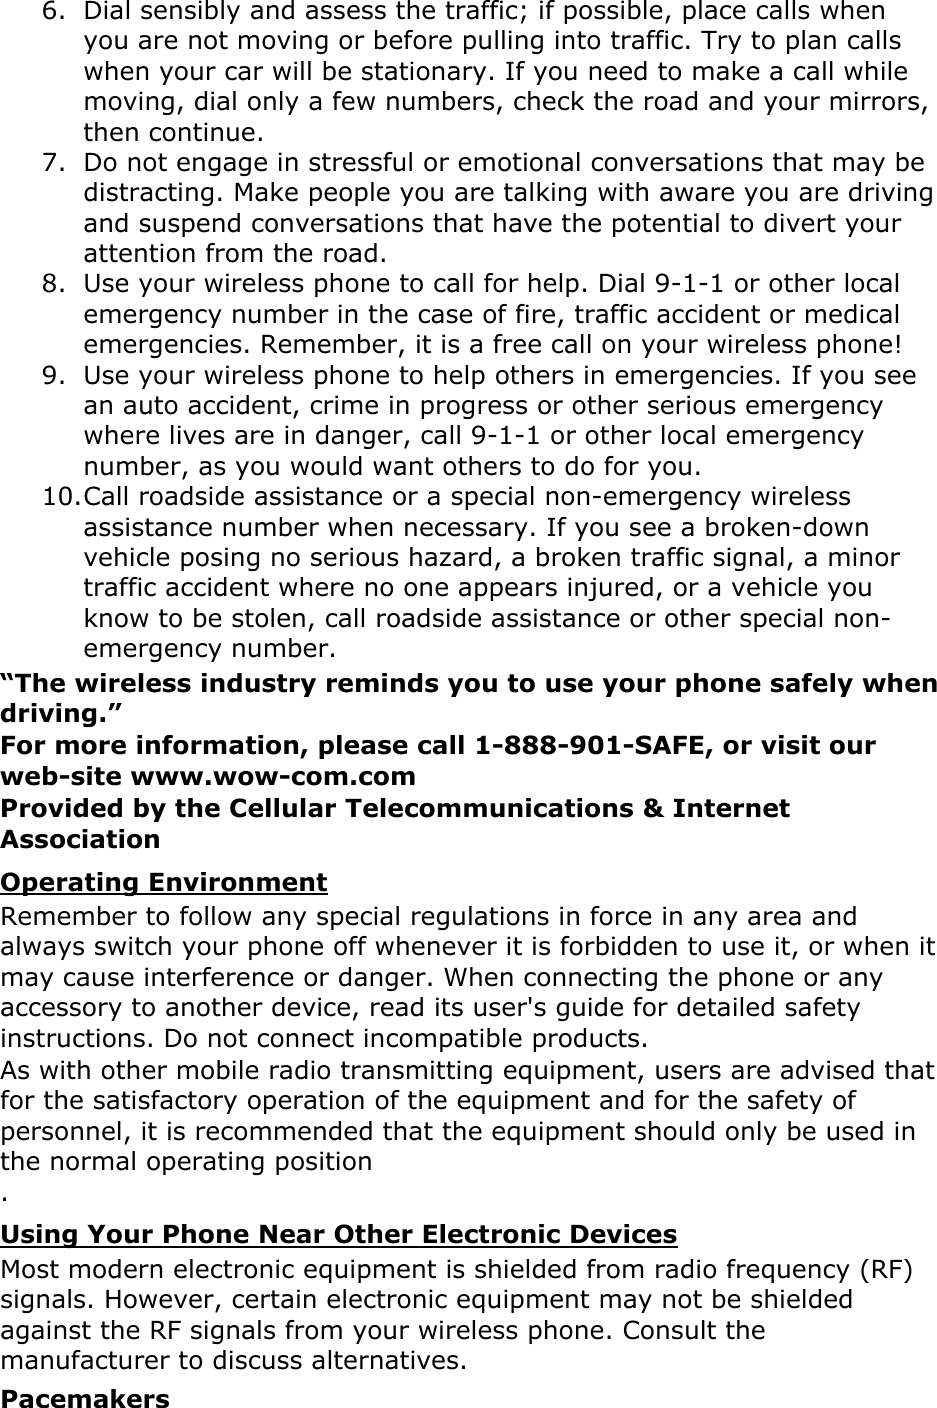 6. Dial sensibly and assess the traffic; if possible, place calls when you are not moving or before pulling into traffic. Try to plan calls when your car will be stationary. If you need to make a call while moving, dial only a few numbers, check the road and your mirrors, then continue. 7. Do not engage in stressful or emotional conversations that may be distracting. Make people you are talking with aware you are driving and suspend conversations that have the potential to divert your attention from the road. 8. Use your wireless phone to call for help. Dial 9-1-1 or other local emergency number in the case of fire, traffic accident or medical emergencies. Remember, it is a free call on your wireless phone! 9. Use your wireless phone to help others in emergencies. If you see an auto accident, crime in progress or other serious emergency where lives are in danger, call 9-1-1 or other local emergency number, as you would want others to do for you. 10. Call roadside assistance or a special non-emergency wireless assistance number when necessary. If you see a broken-down vehicle posing no serious hazard, a broken traffic signal, a minor traffic accident where no one appears injured, or a vehicle you know to be stolen, call roadside assistance or other special non-emergency number. “The wireless industry reminds you to use your phone safely when driving.” For more information, please call 1-888-901-SAFE, or visit our web-site www.wow-com.com Provided by the Cellular Telecommunications &amp; Internet Association Operating Environment Remember to follow any special regulations in force in any area and always switch your phone off whenever it is forbidden to use it, or when it may cause interference or danger. When connecting the phone or any accessory to another device, read its user&apos;s guide for detailed safety instructions. Do not connect incompatible products. As with other mobile radio transmitting equipment, users are advised that for the satisfactory operation of the equipment and for the safety of personnel, it is recommended that the equipment should only be used in the normal operating position  . Using Your Phone Near Other Electronic Devices Most modern electronic equipment is shielded from radio frequency (RF) signals. However, certain electronic equipment may not be shielded against the RF signals from your wireless phone. Consult the manufacturer to discuss alternatives. Pacemakers 